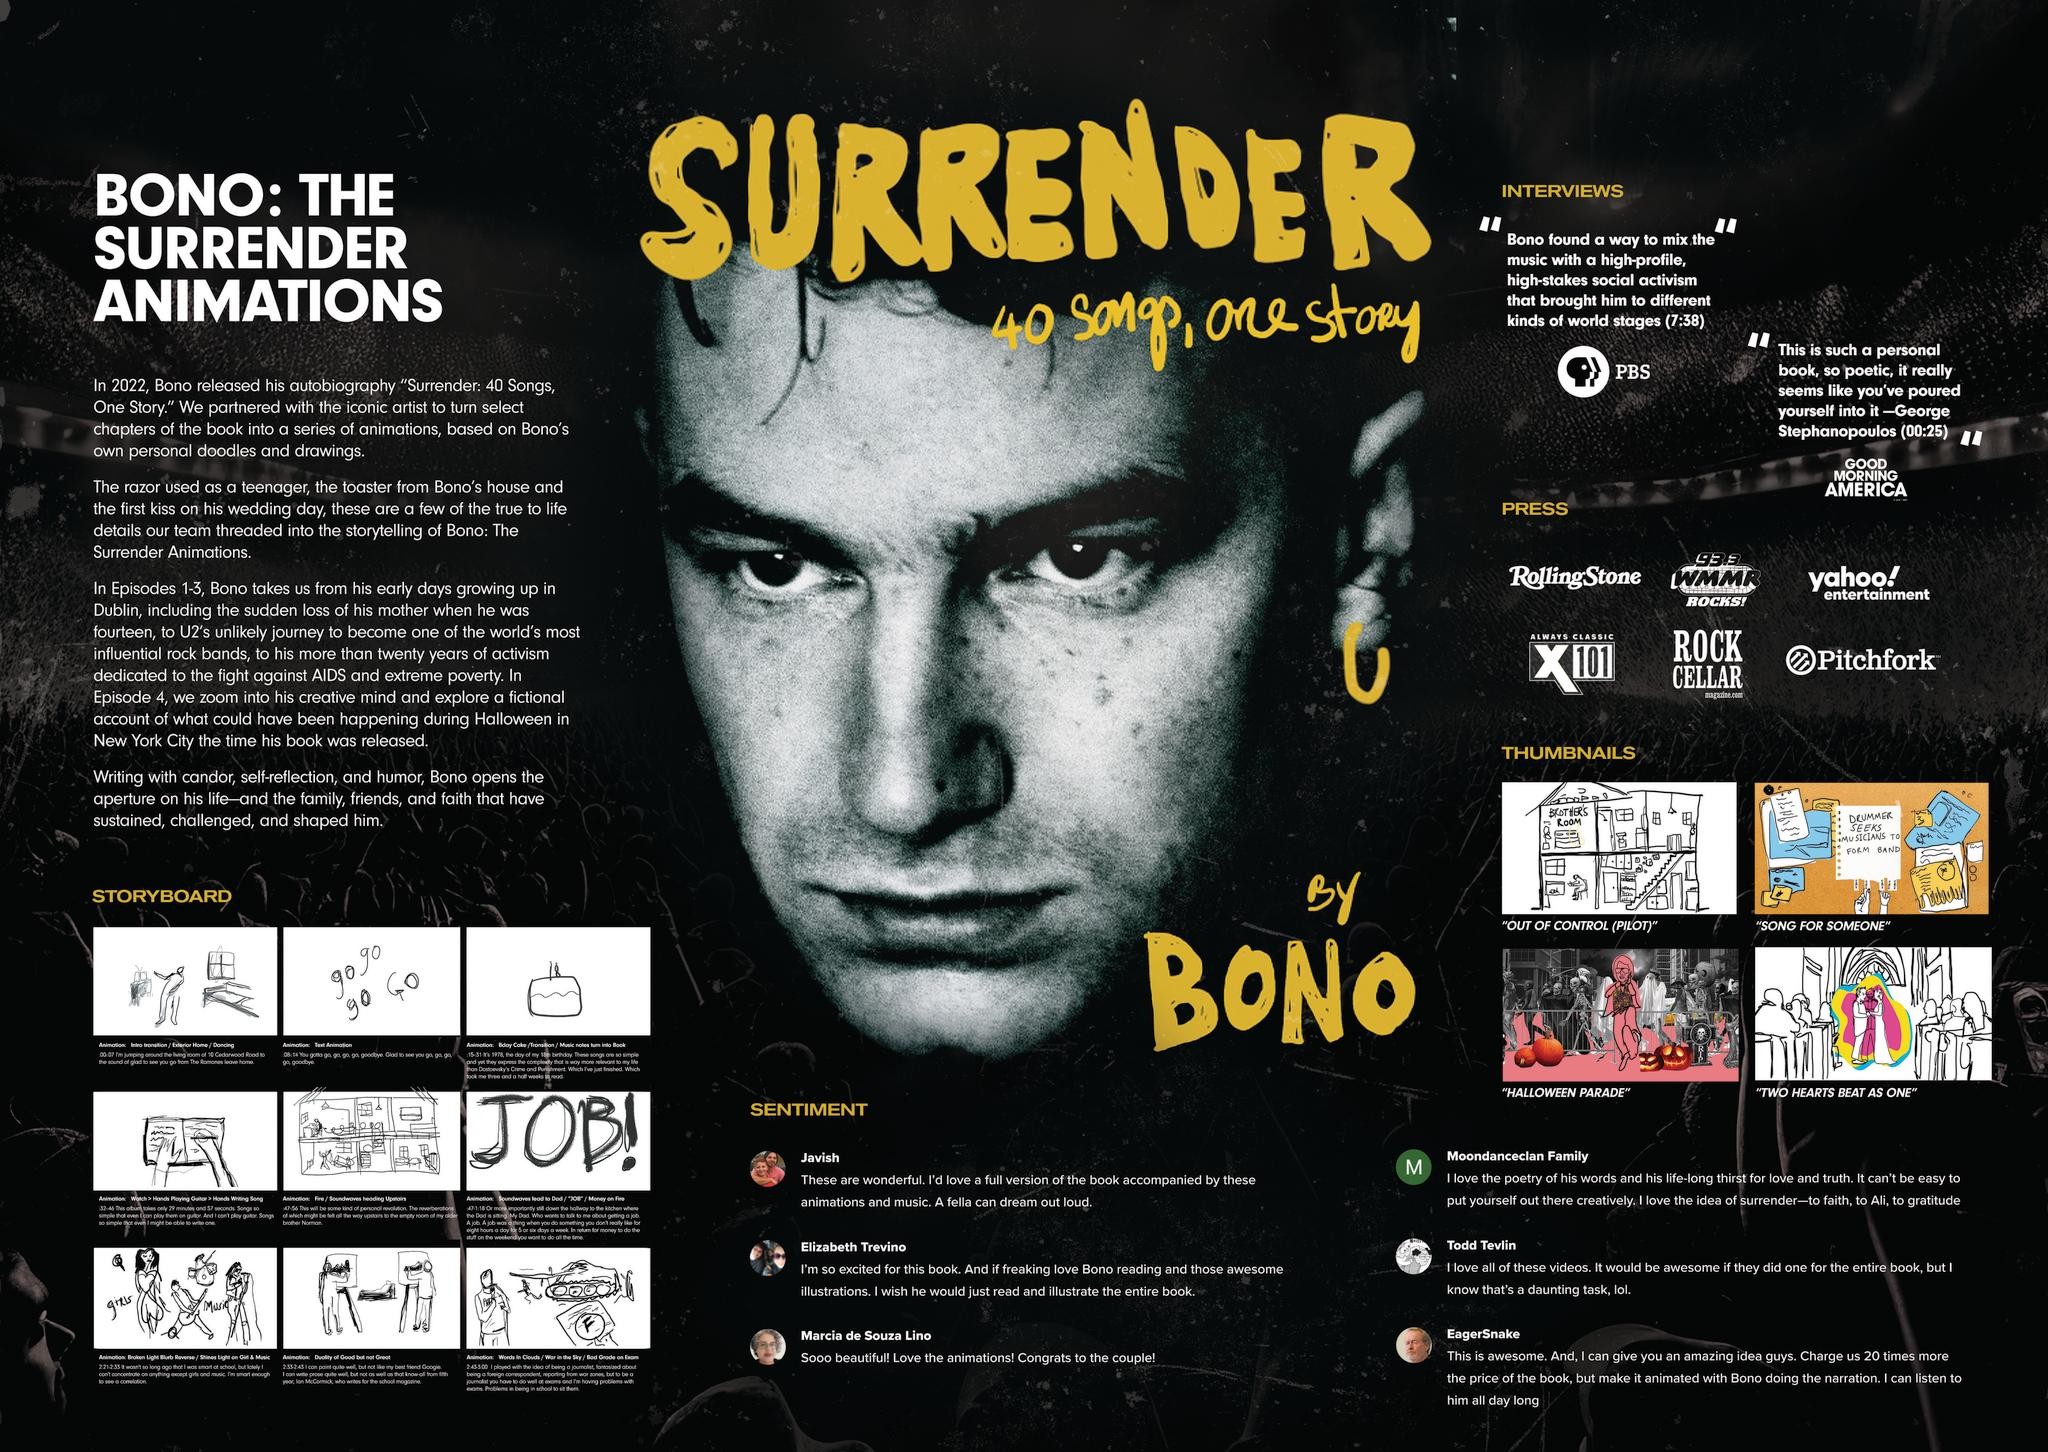 SURRENDER: 40 SONGS, ONE STORY BY BONO